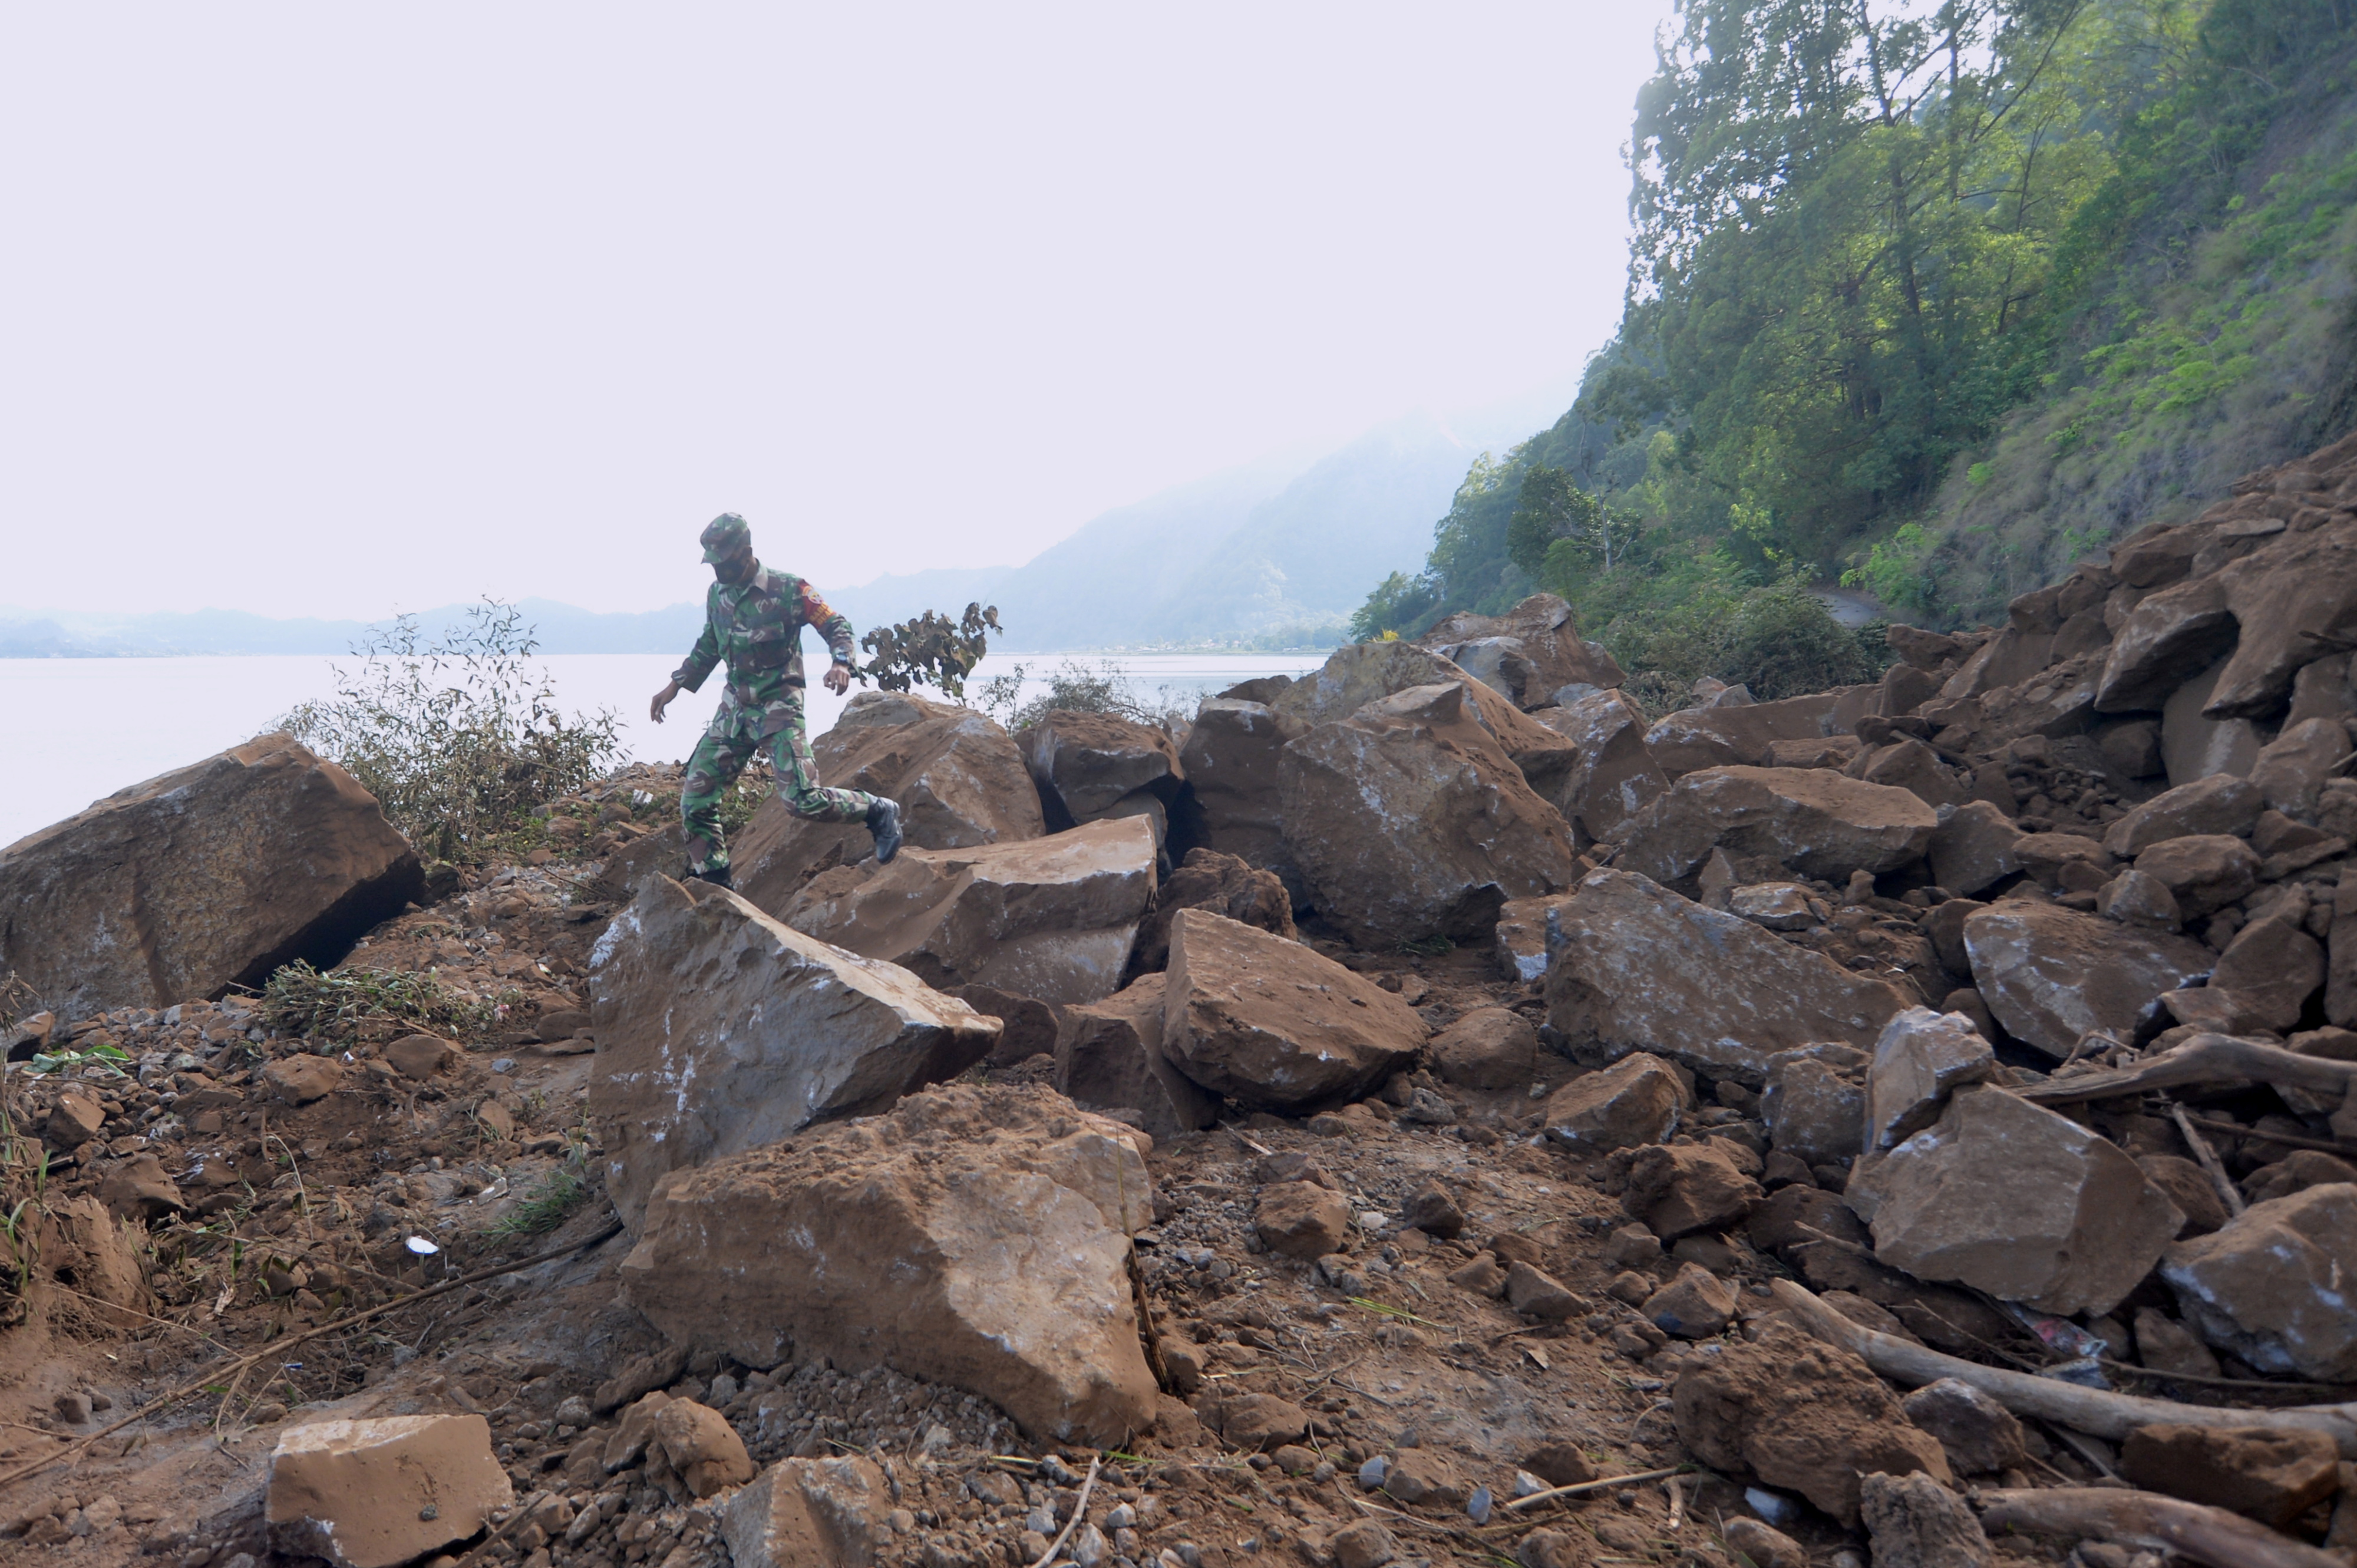 A member of Indonesian military walks through a landslide area after a 4.8 magnitude earthquake struck northeast of Bali